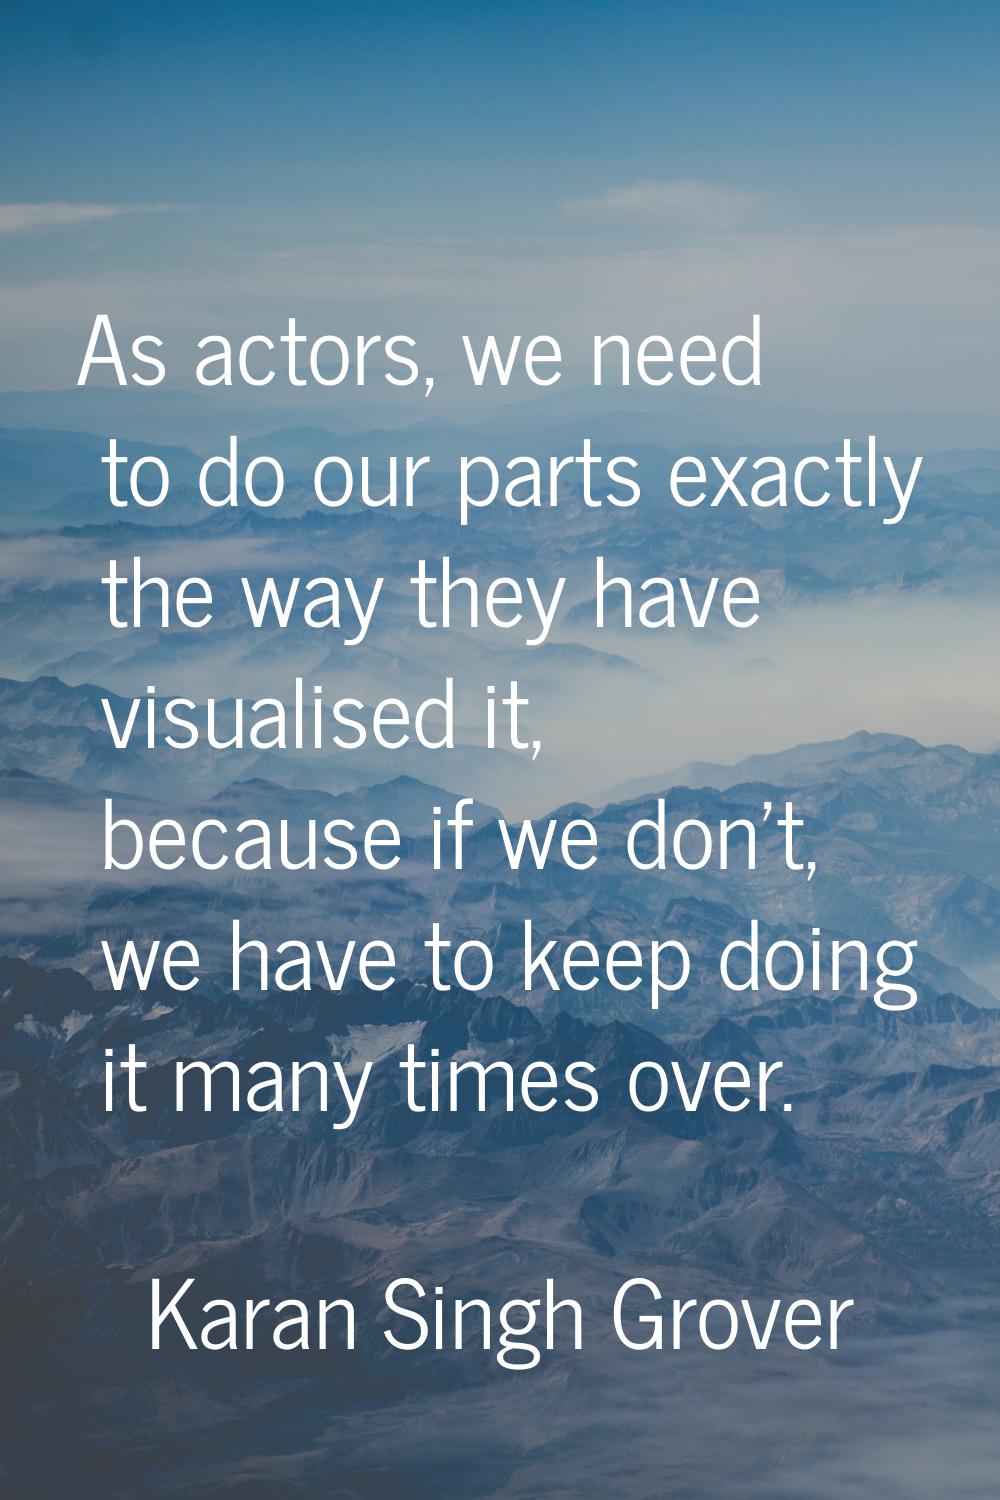 As actors, we need to do our parts exactly the way they have visualised it, because if we don't, we